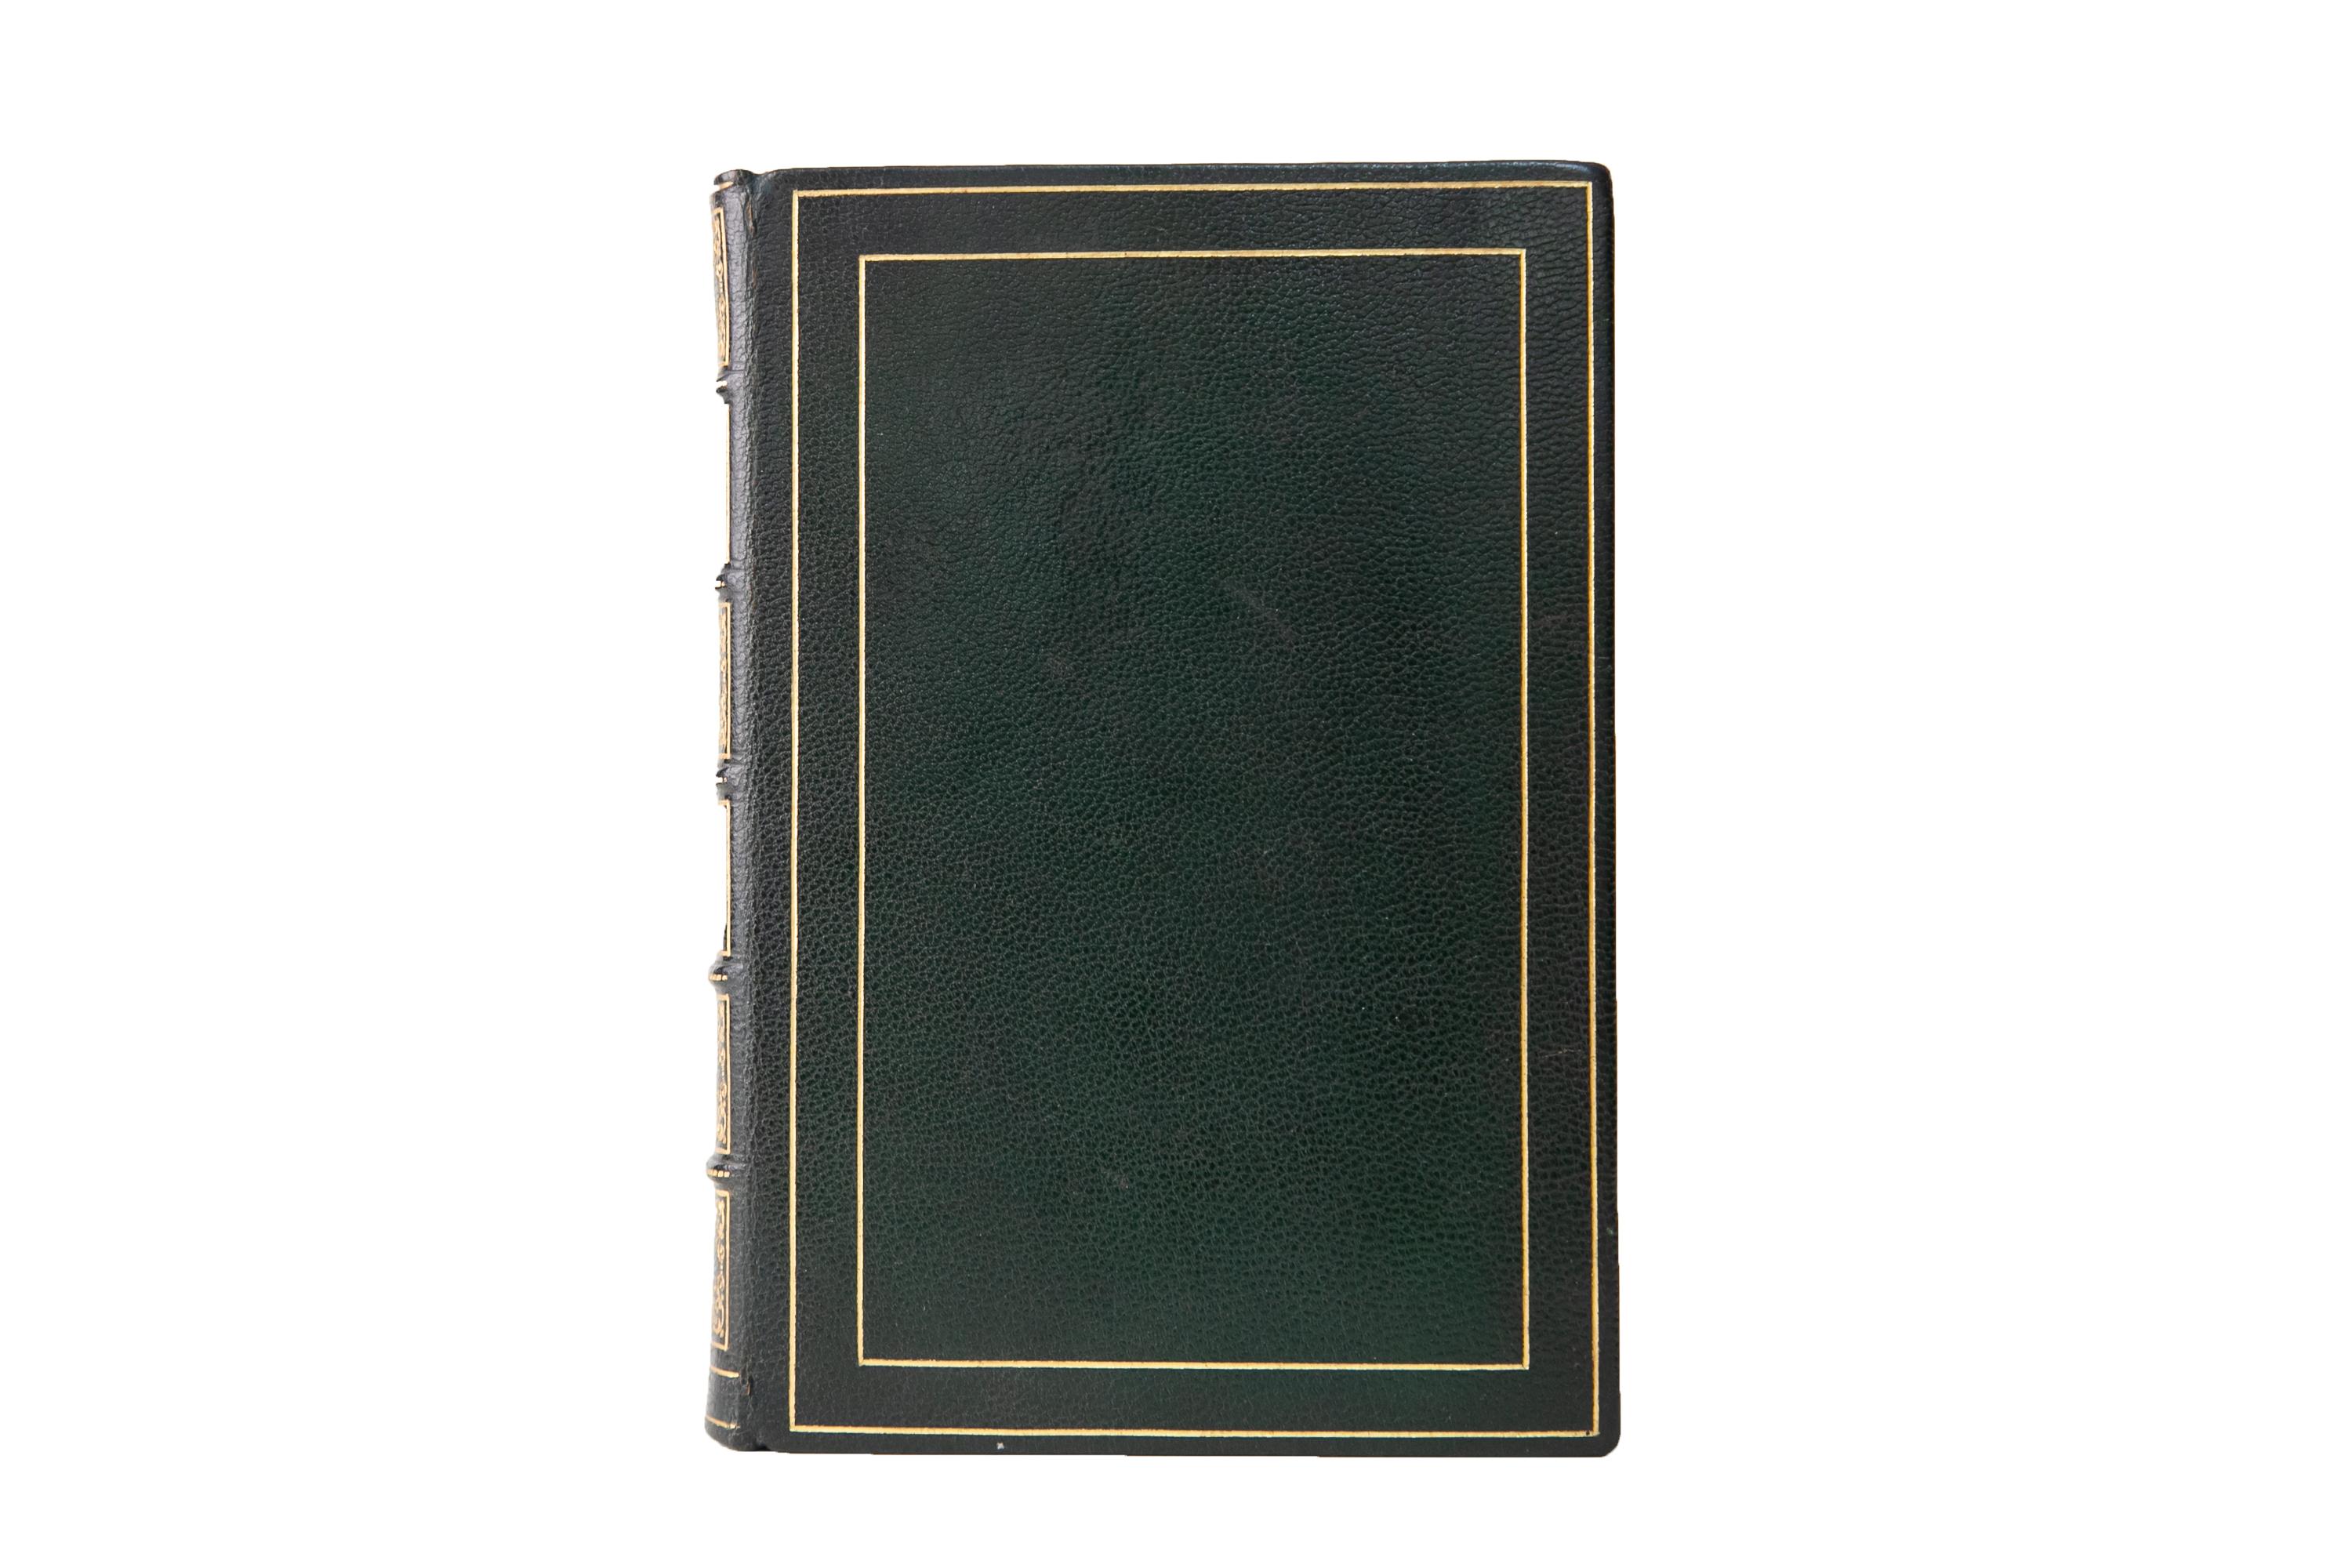 1 Volume. Leo Tolstoy, Anna Karenina. Bound in full green Morocco with the covers displaying a gilt-tooled border. The spines display raised bands, floral panel details, bordering, and label lettering, all gilt-tooled. The top edge is gilded with